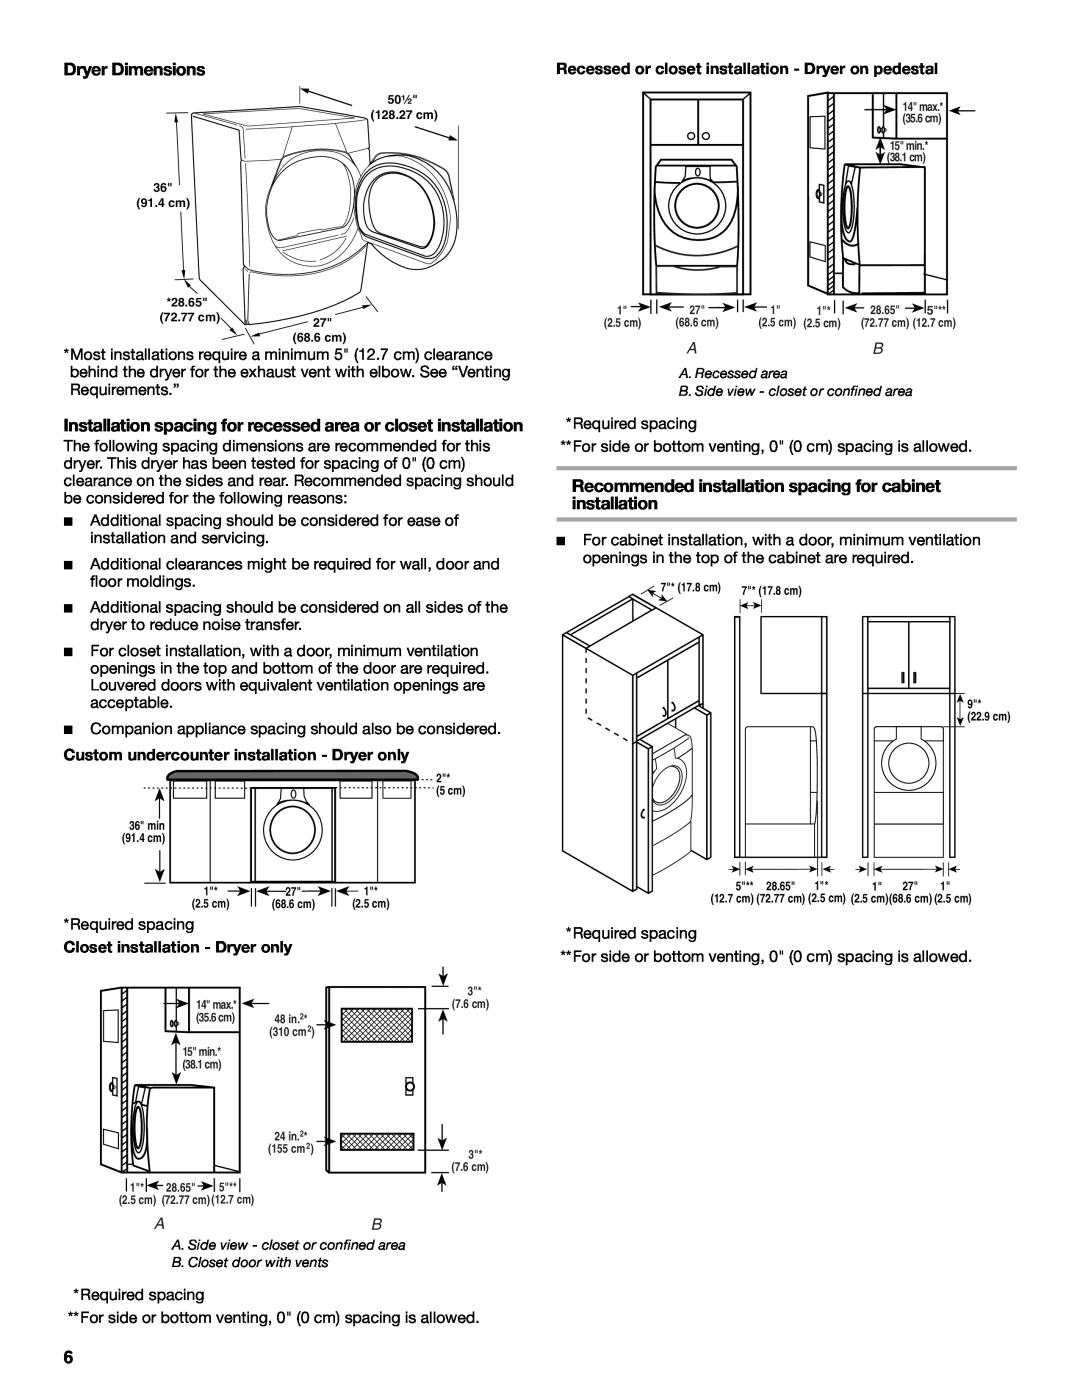 Whirlpool W10057260, DUET SPORT manual Dryer Dimensions, Installation spacing for recessed area or closet installation 